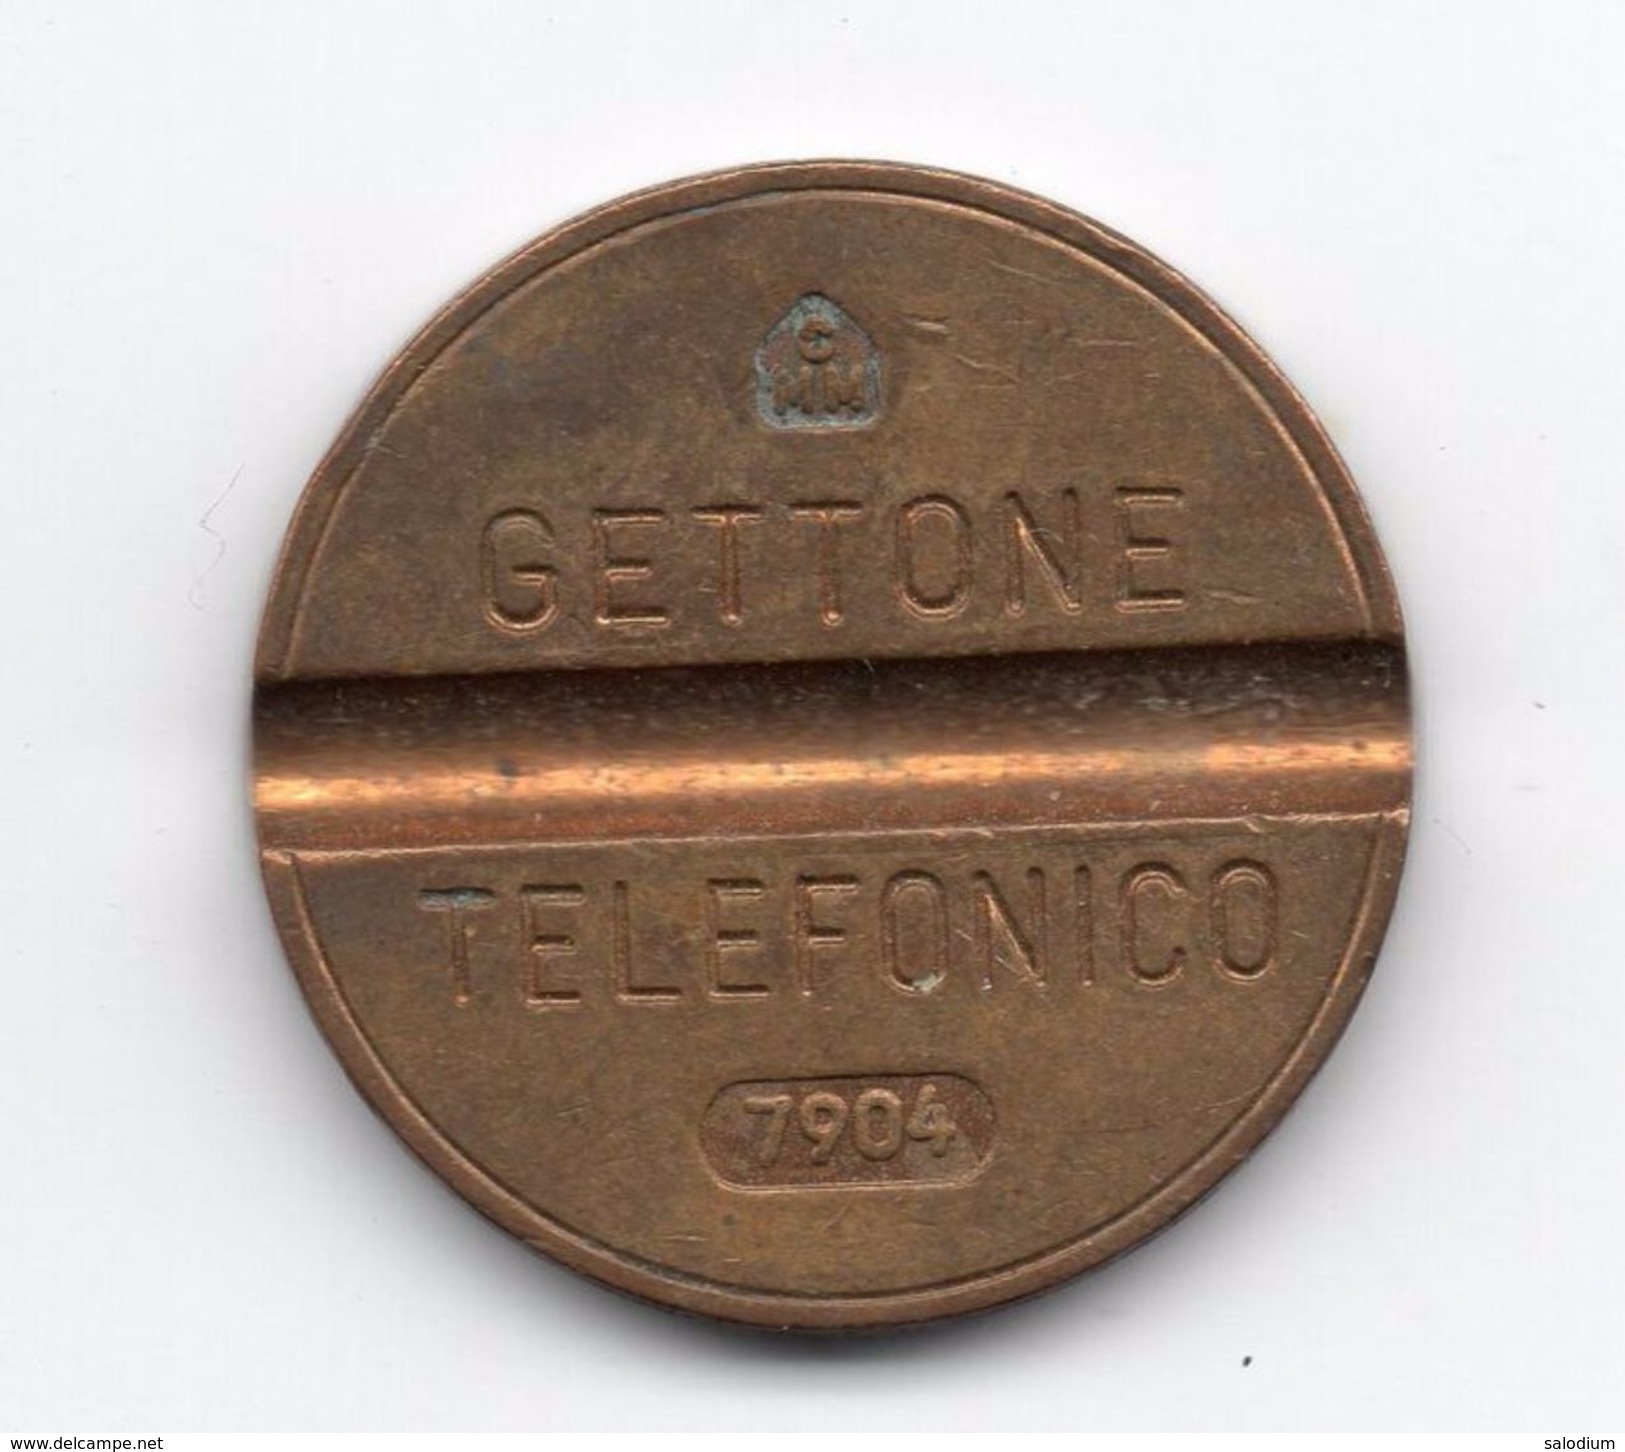 Gettone Telefonico 7904 Token Telephone - (Id-793) - Professionals/Firms